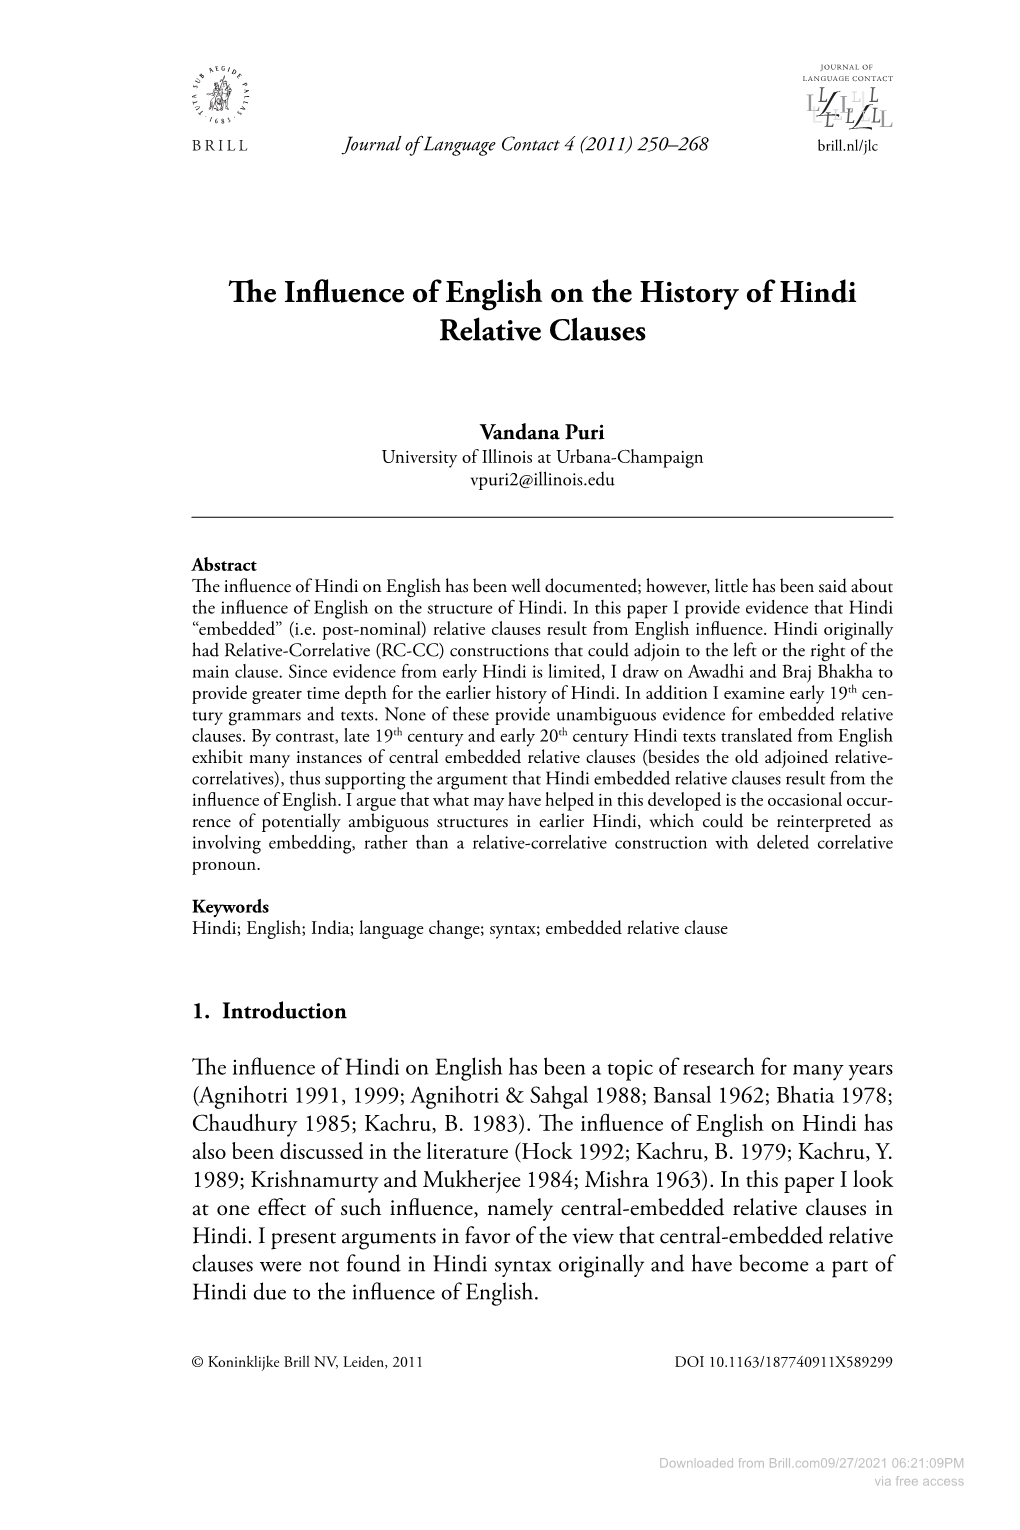 The Influence of English on the History of Hindi Relative Clauses